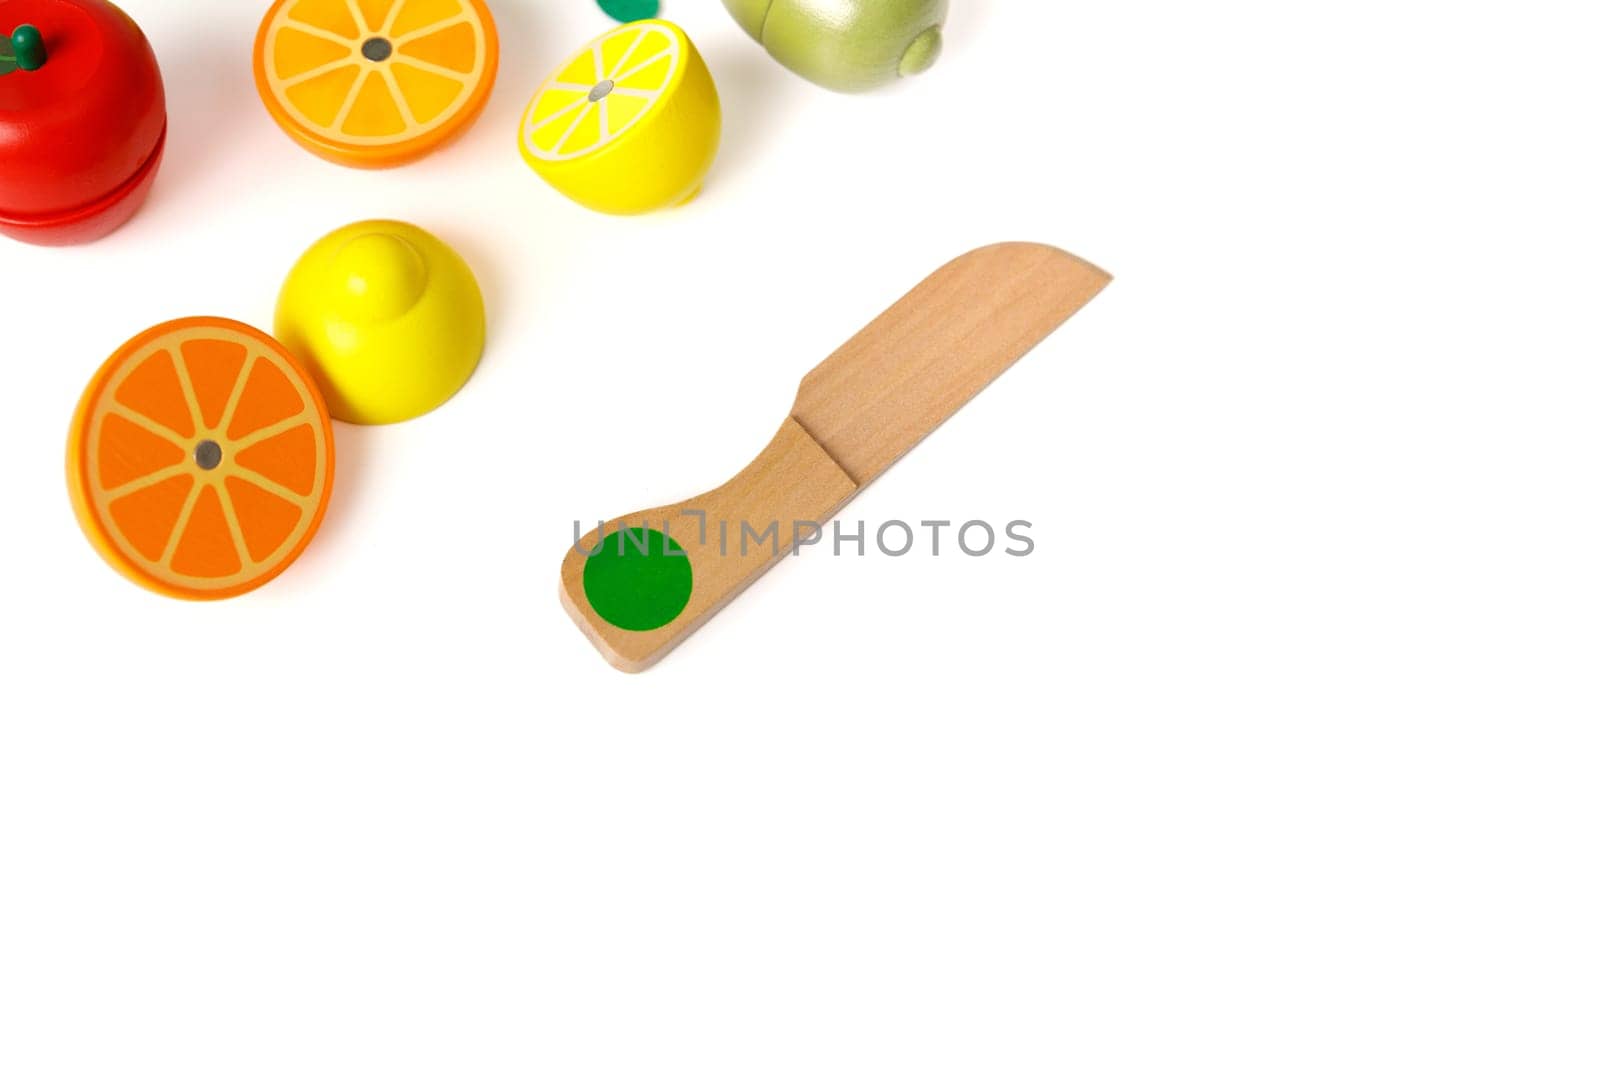 Educational toy set in the form of cut fruits and a wooden knife, isolated on white background, copy space by Rom4ek